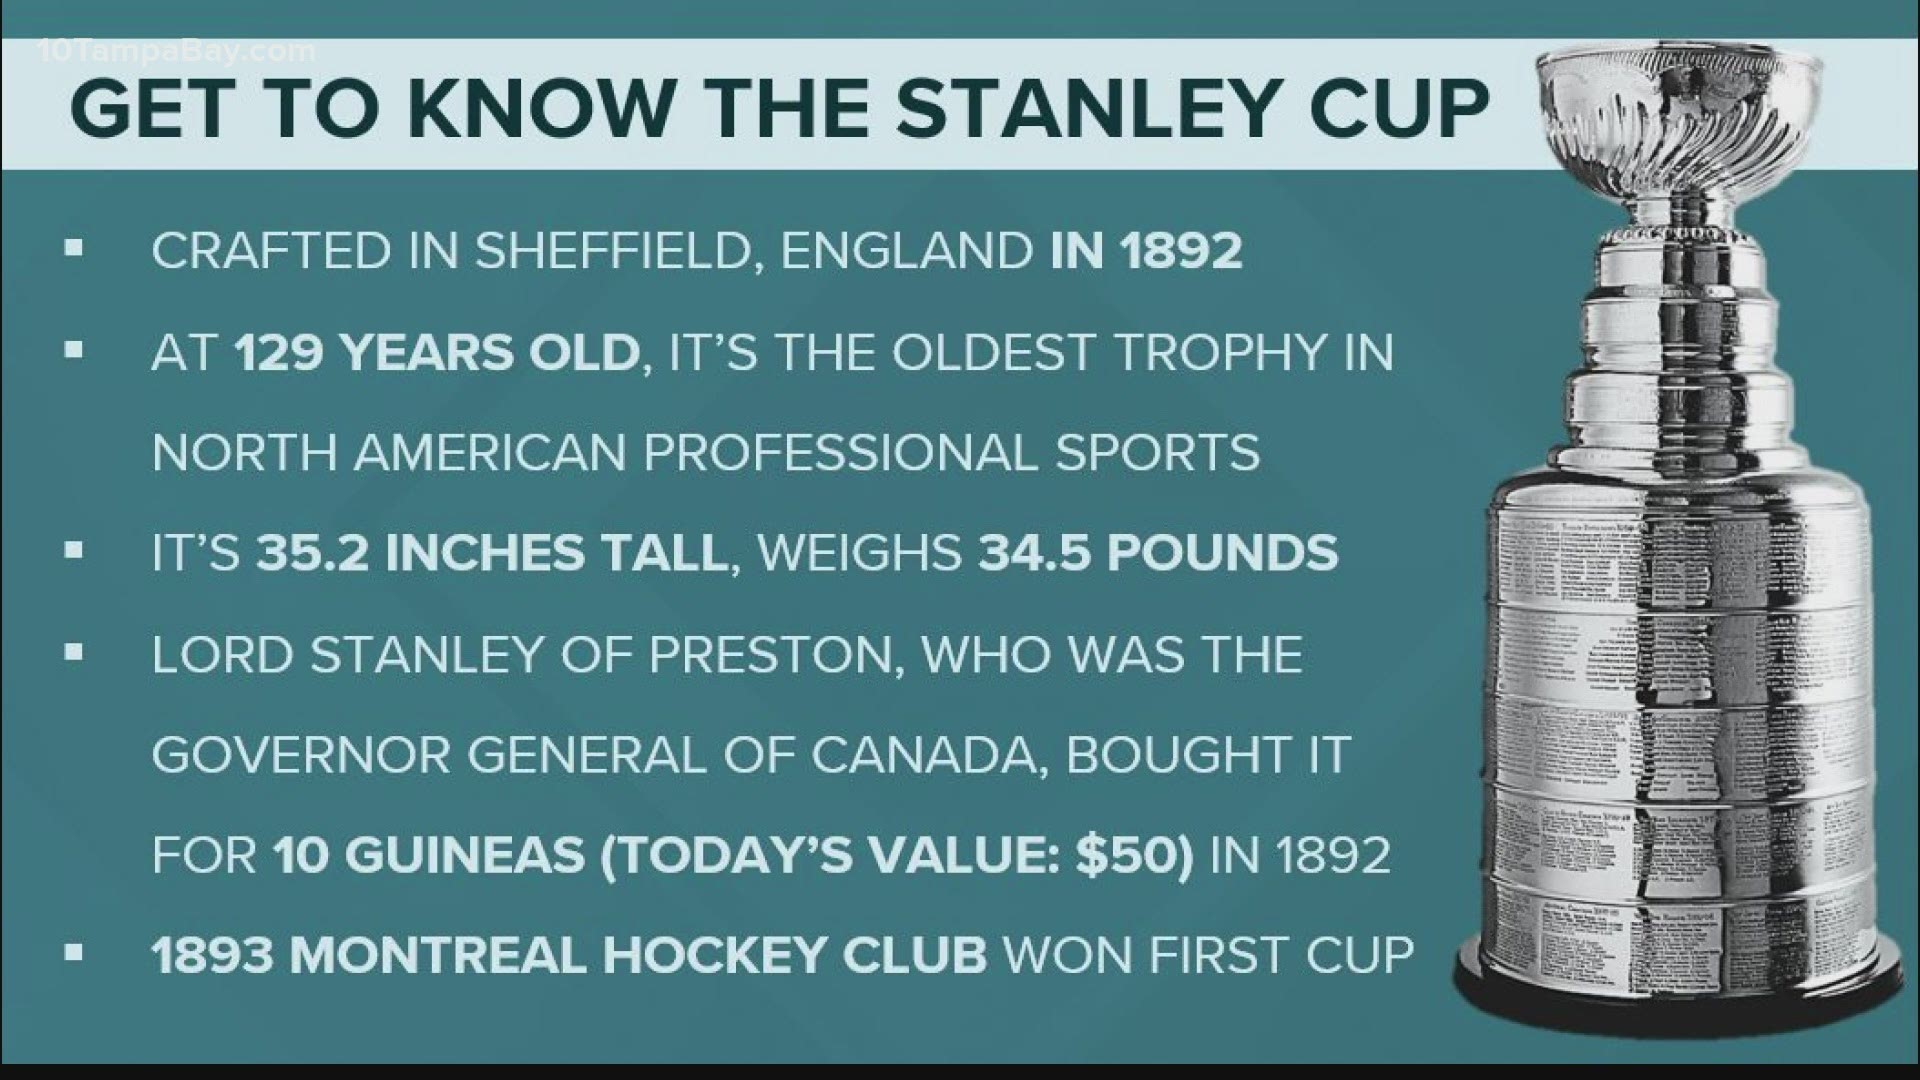 10 things to know about the NHL's Stanley Cup, including its real name